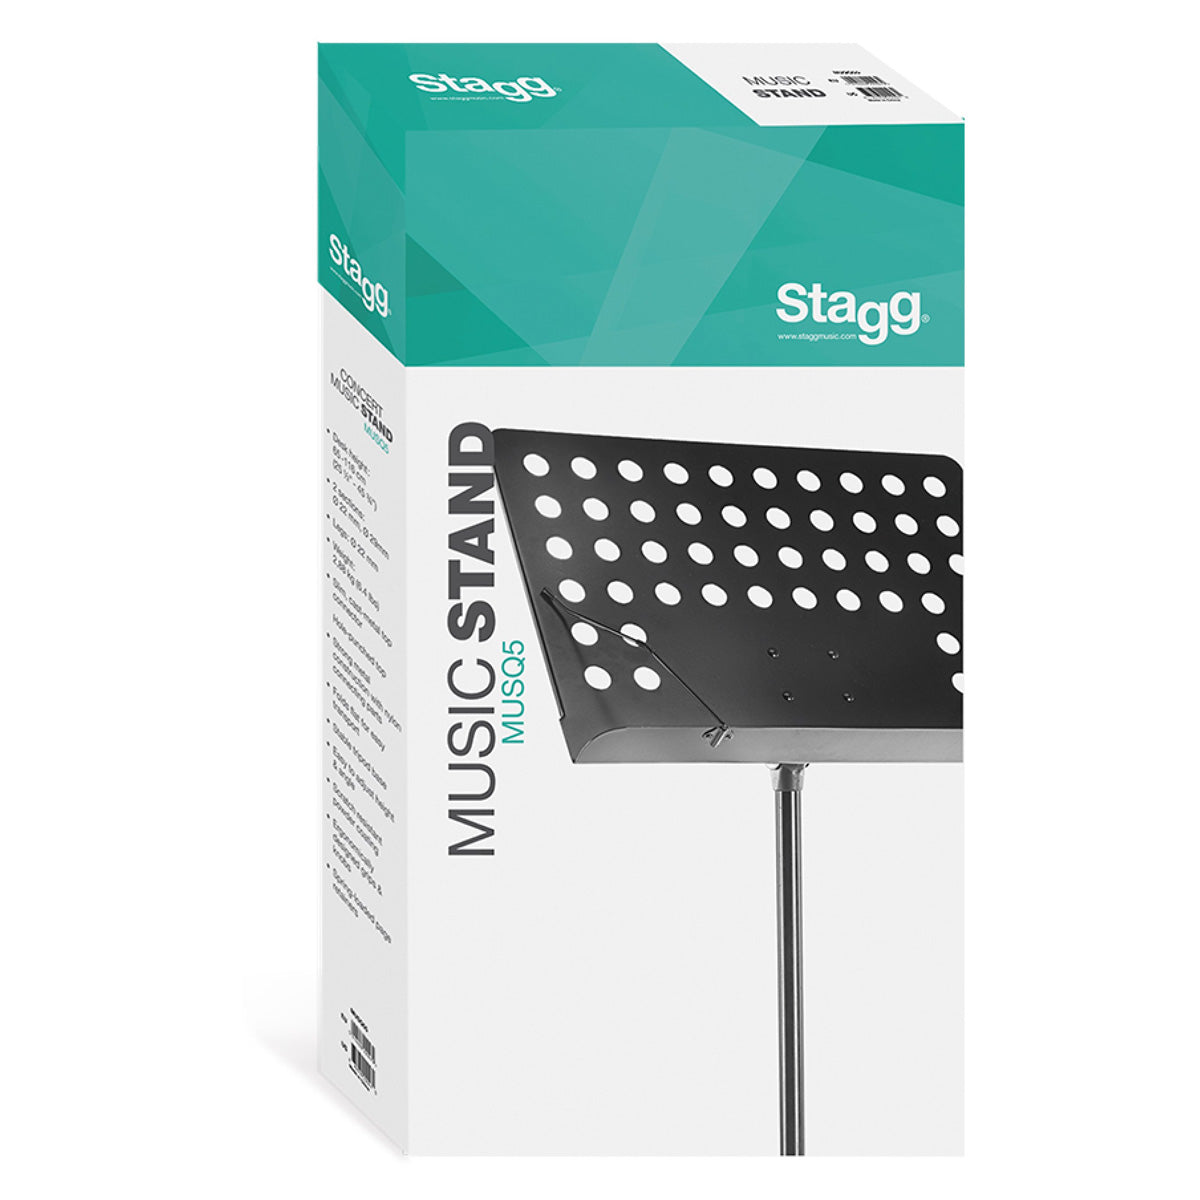 Stagg MUSQ5 Orchestral Music Stand